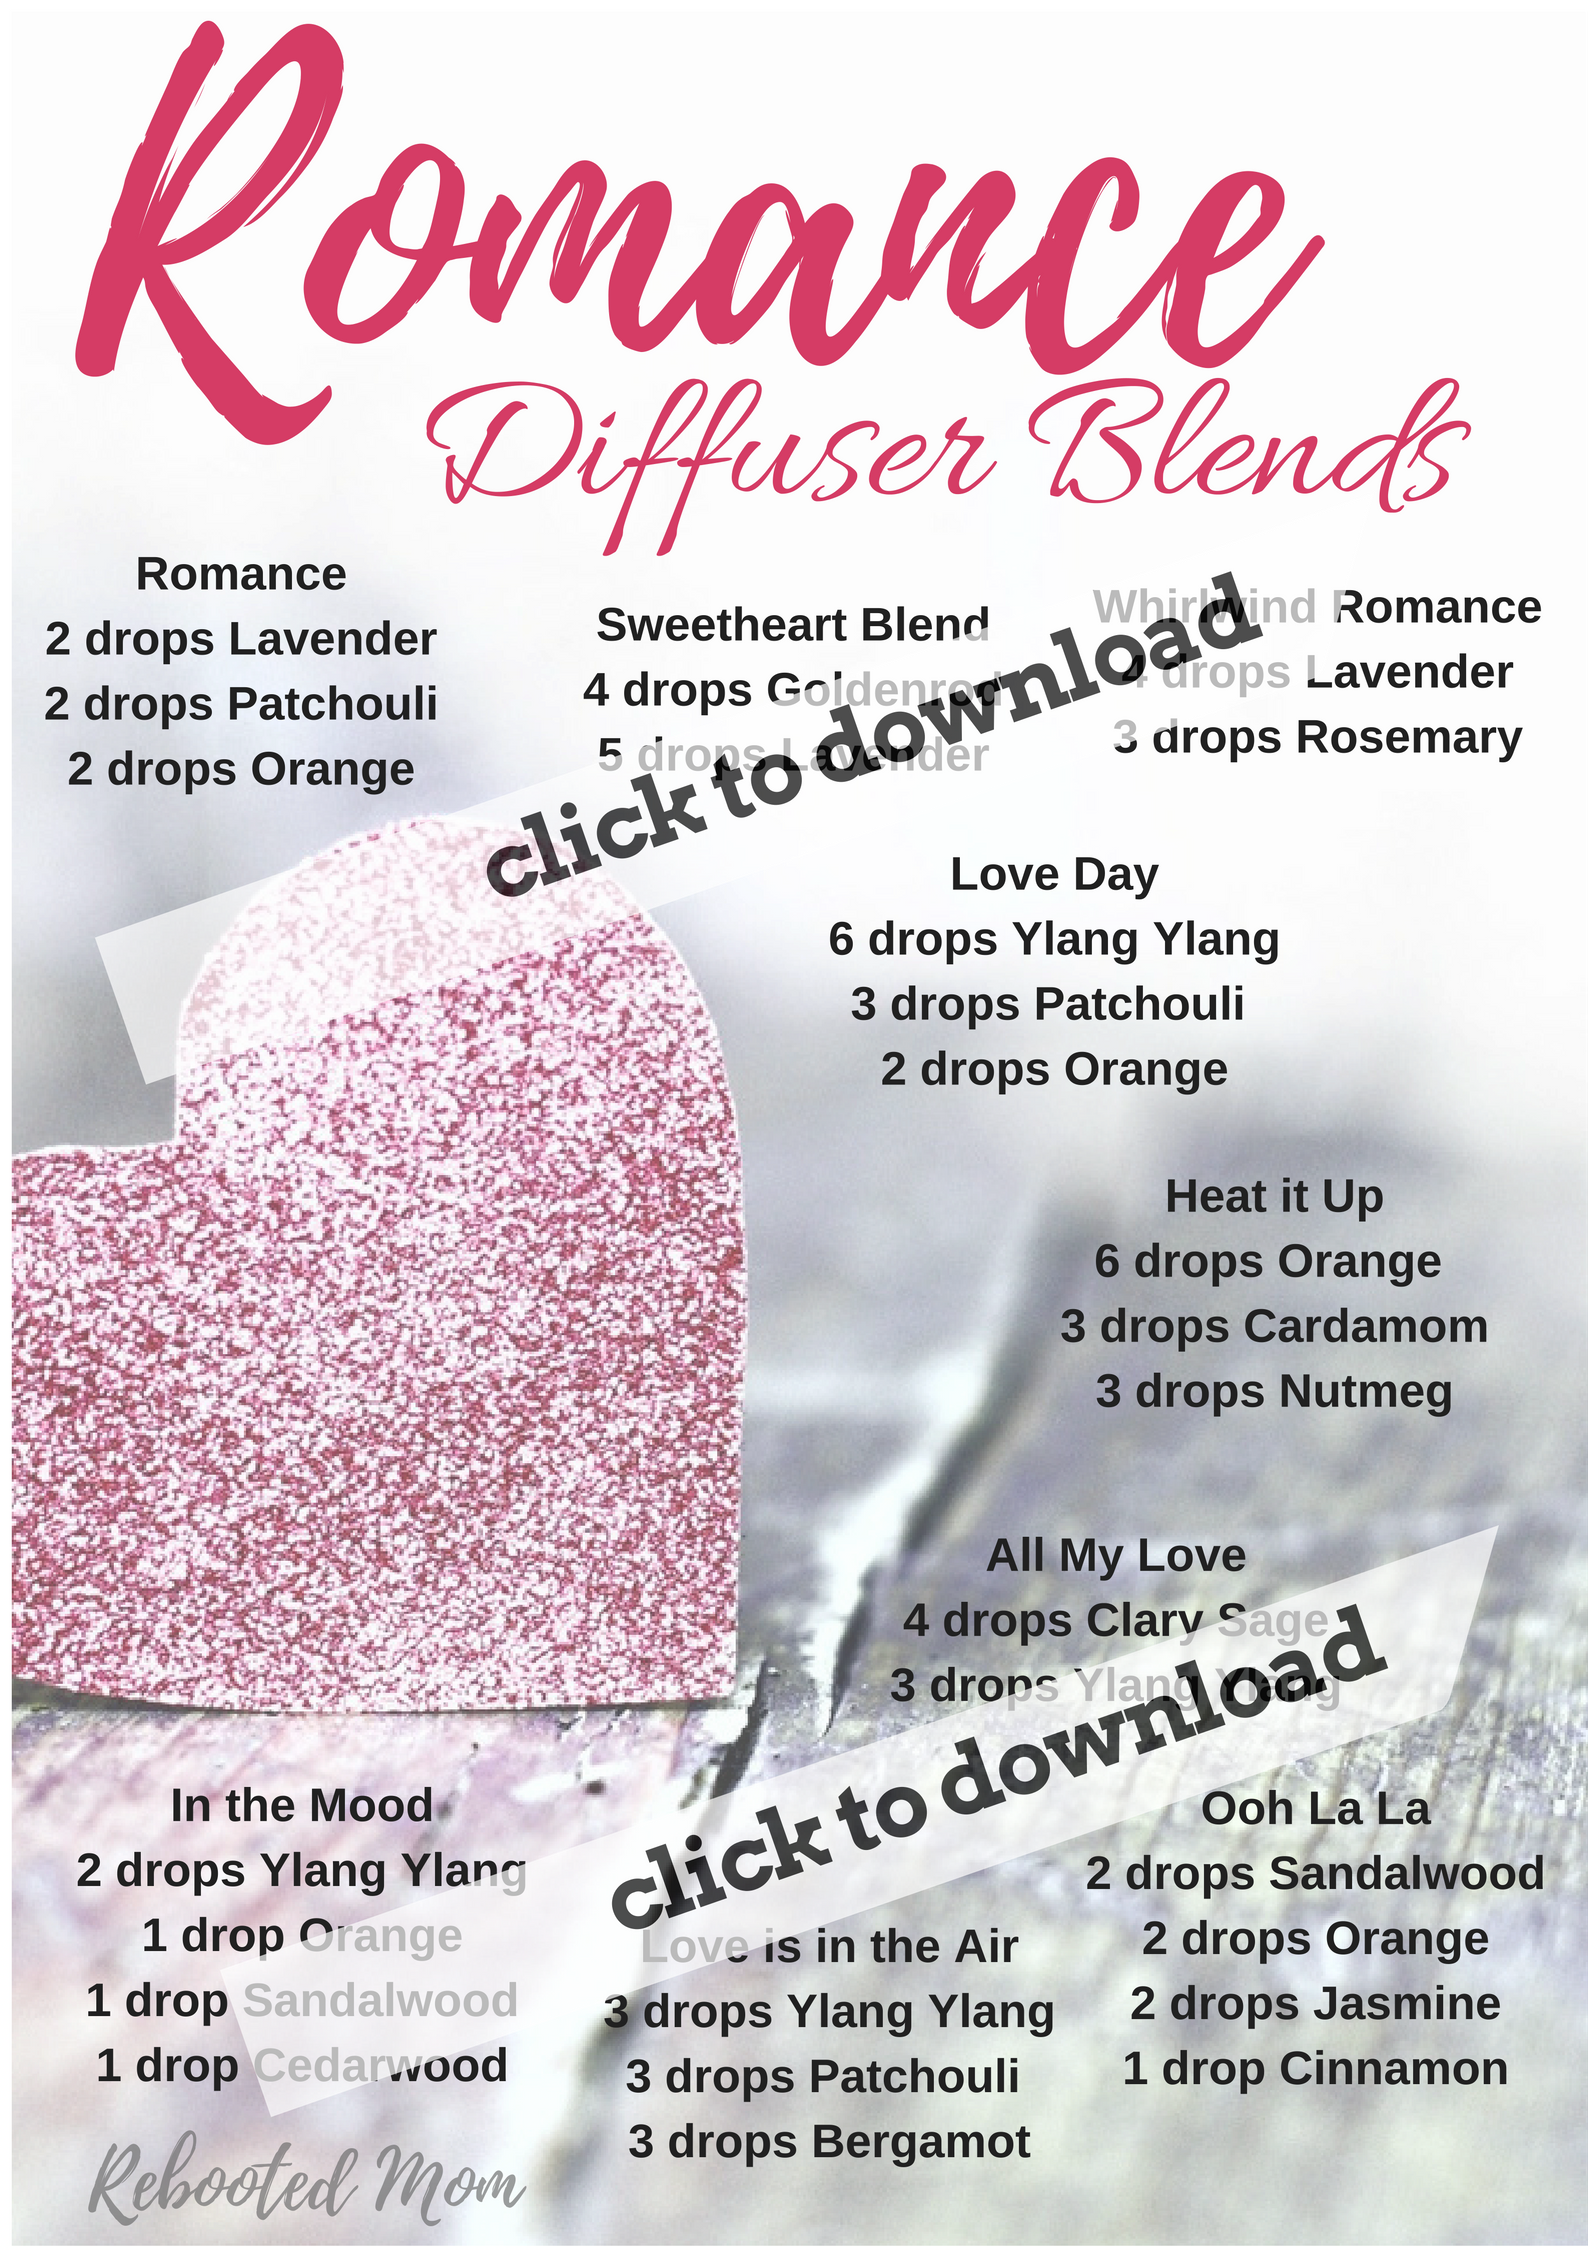 Valentine's Day is quickly approaching - and if you are looking to capture the mood with your loved one, try any of these Romance Diffuser Blends.